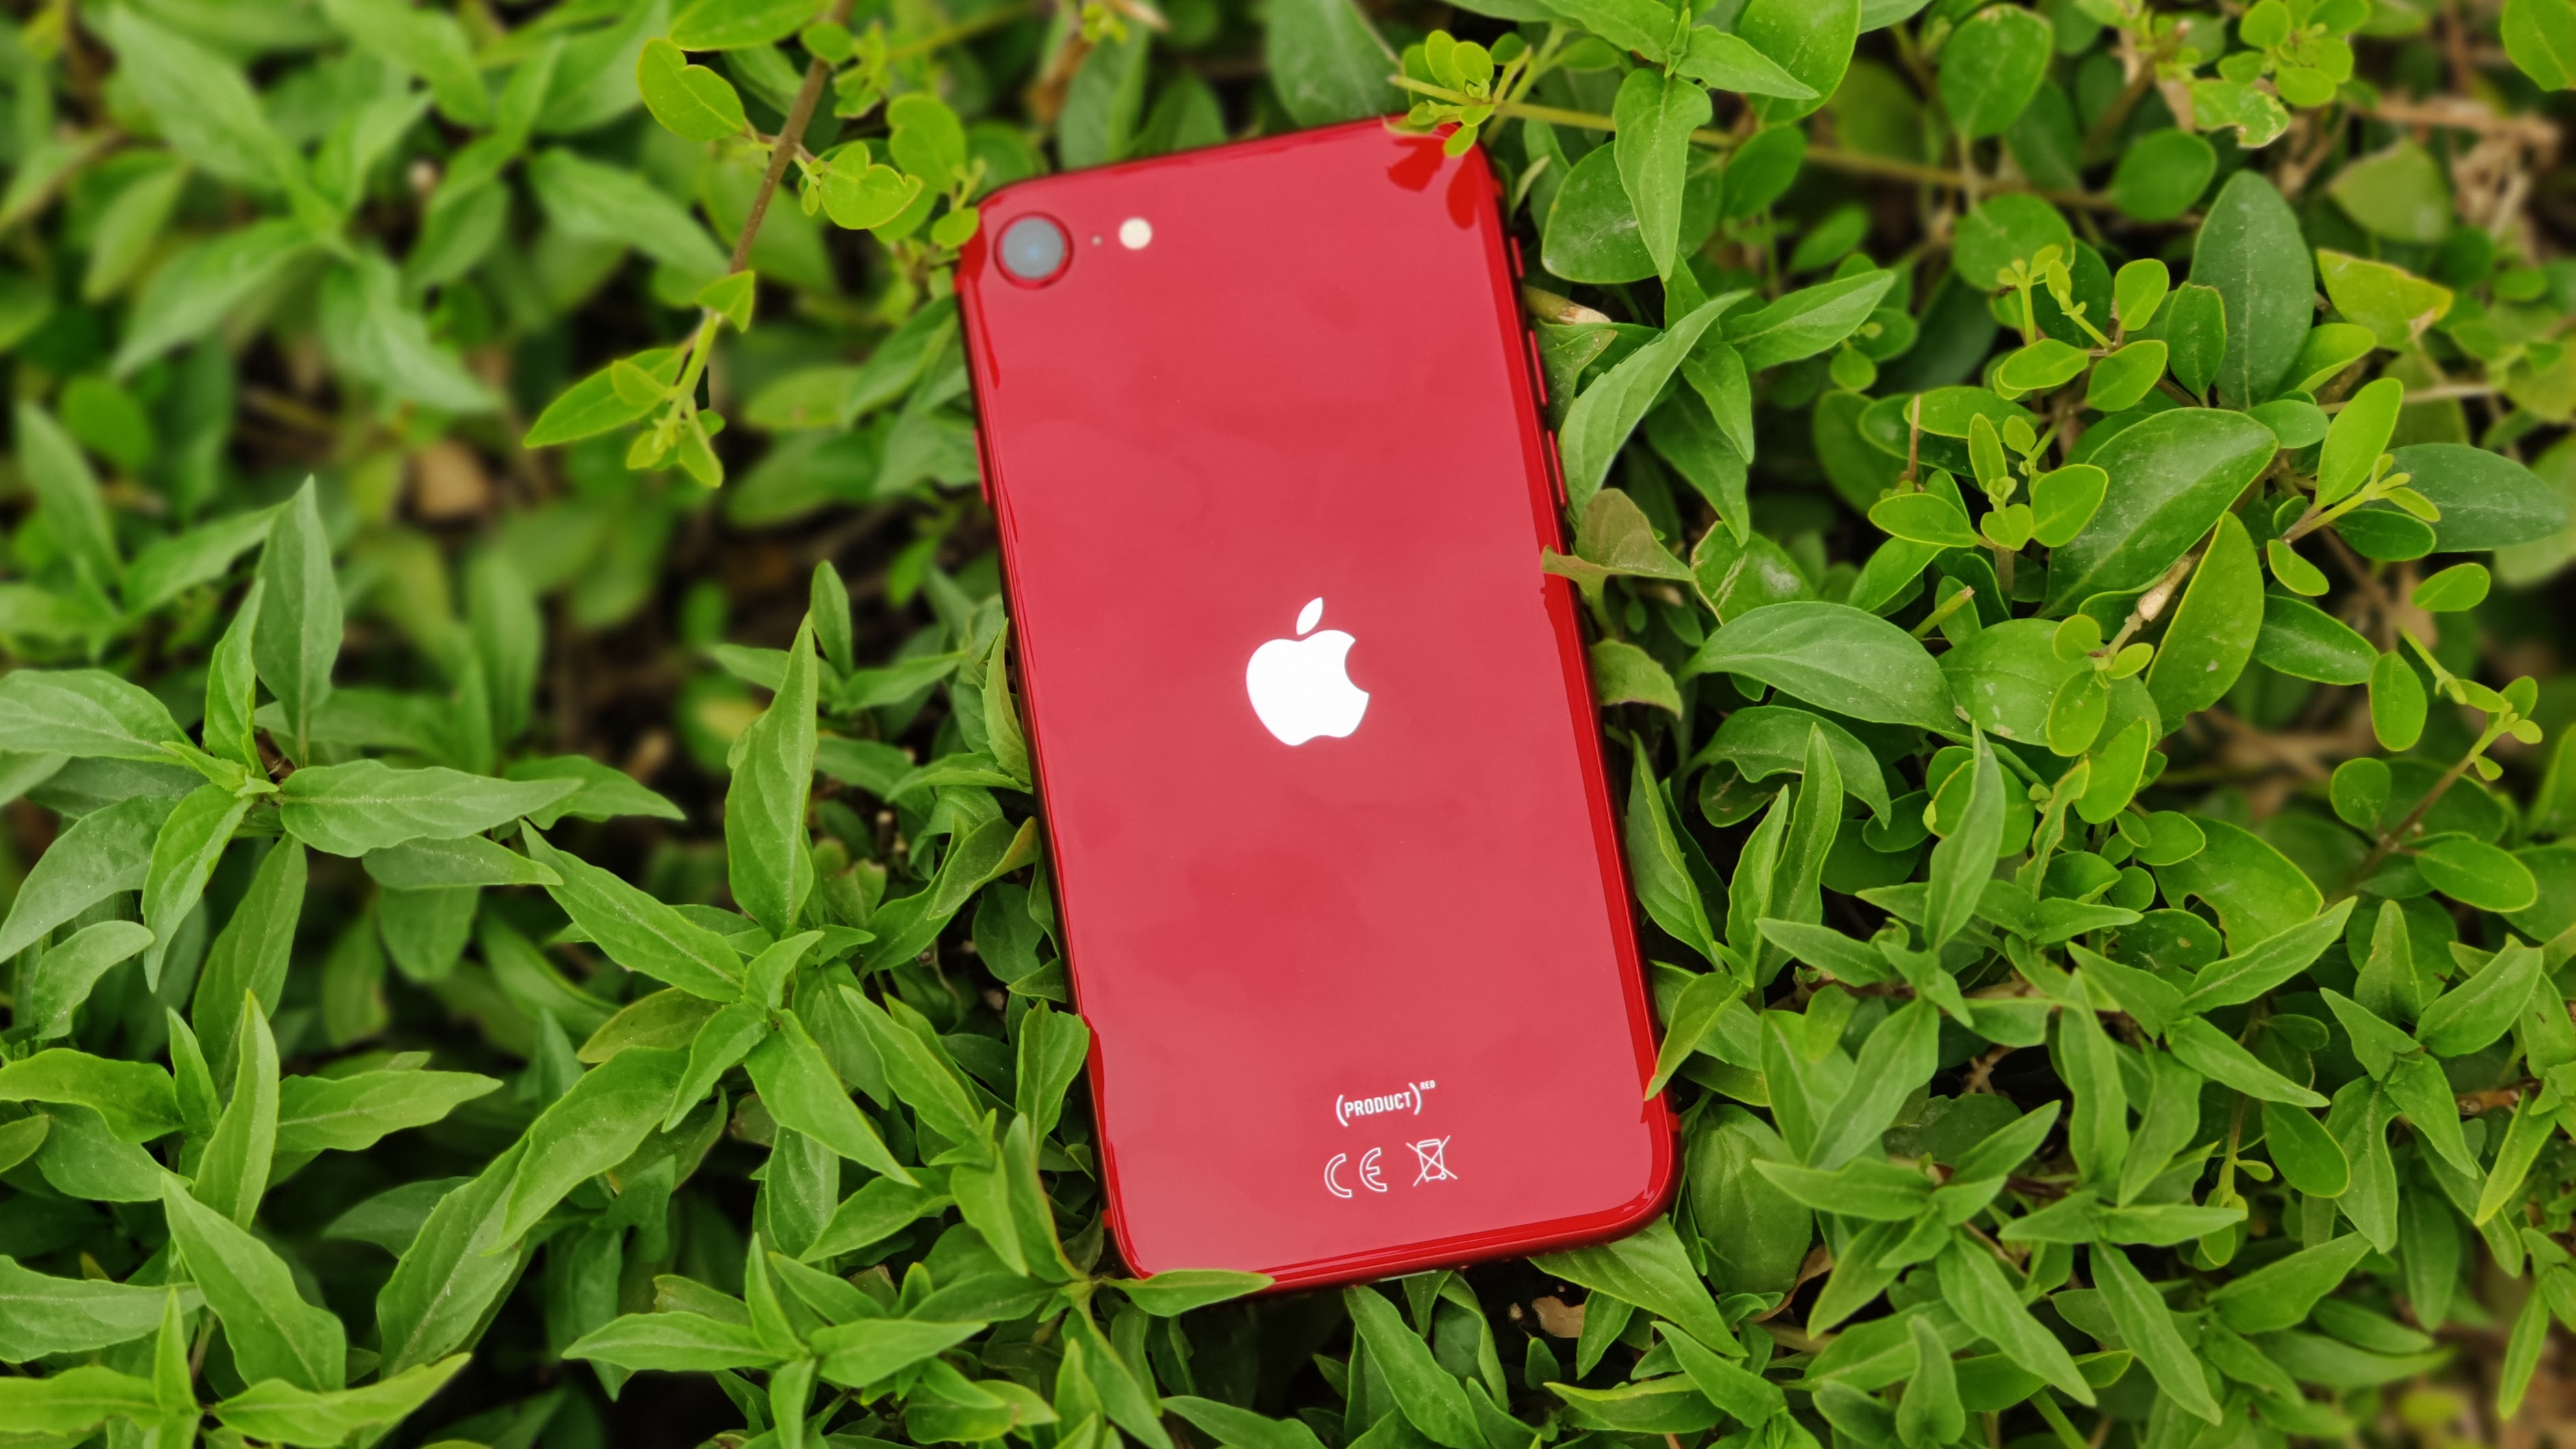 A red iPhone SE (2020) resting on greenery